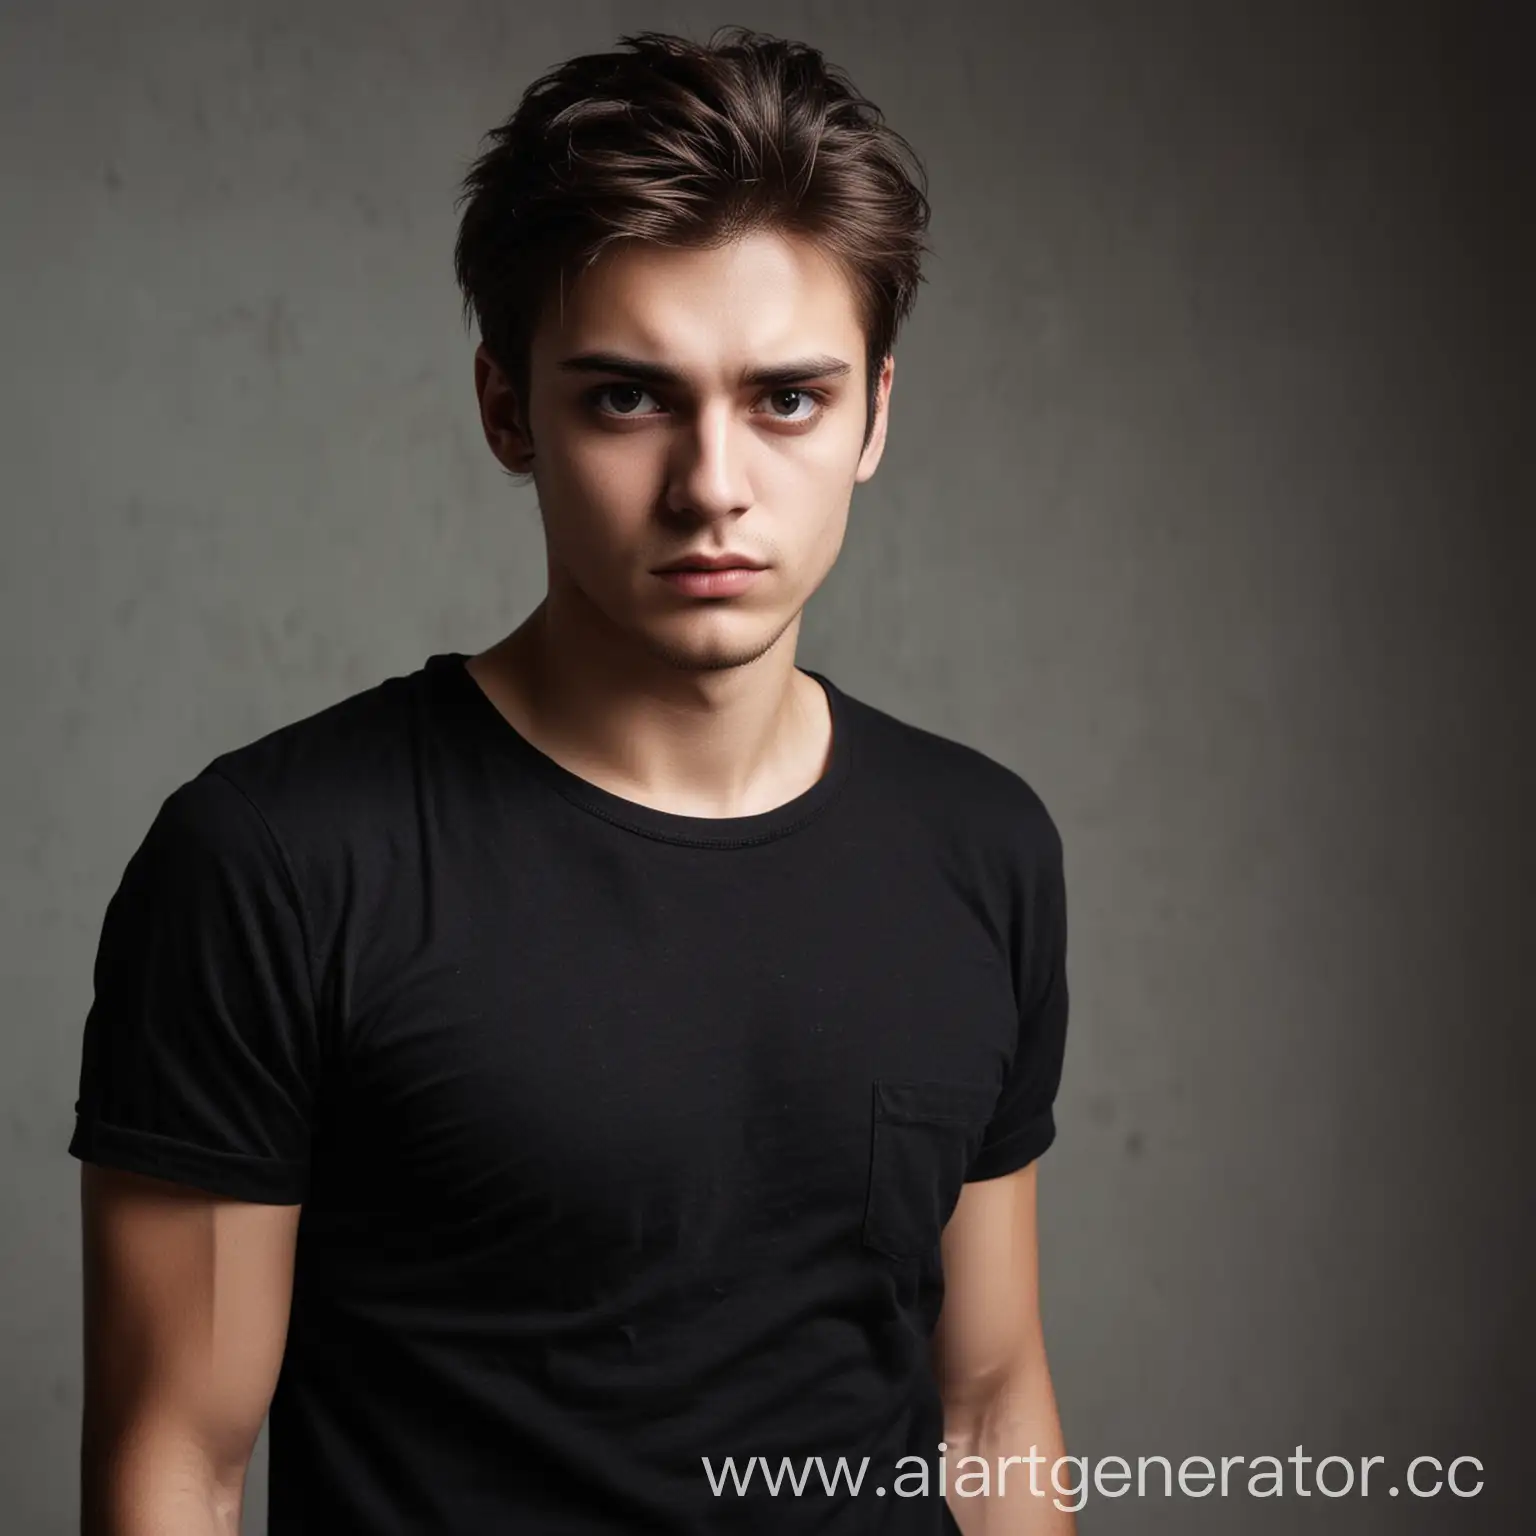 Young-Brunet-Man-in-Black-Shirt-with-Gloomy-Expression